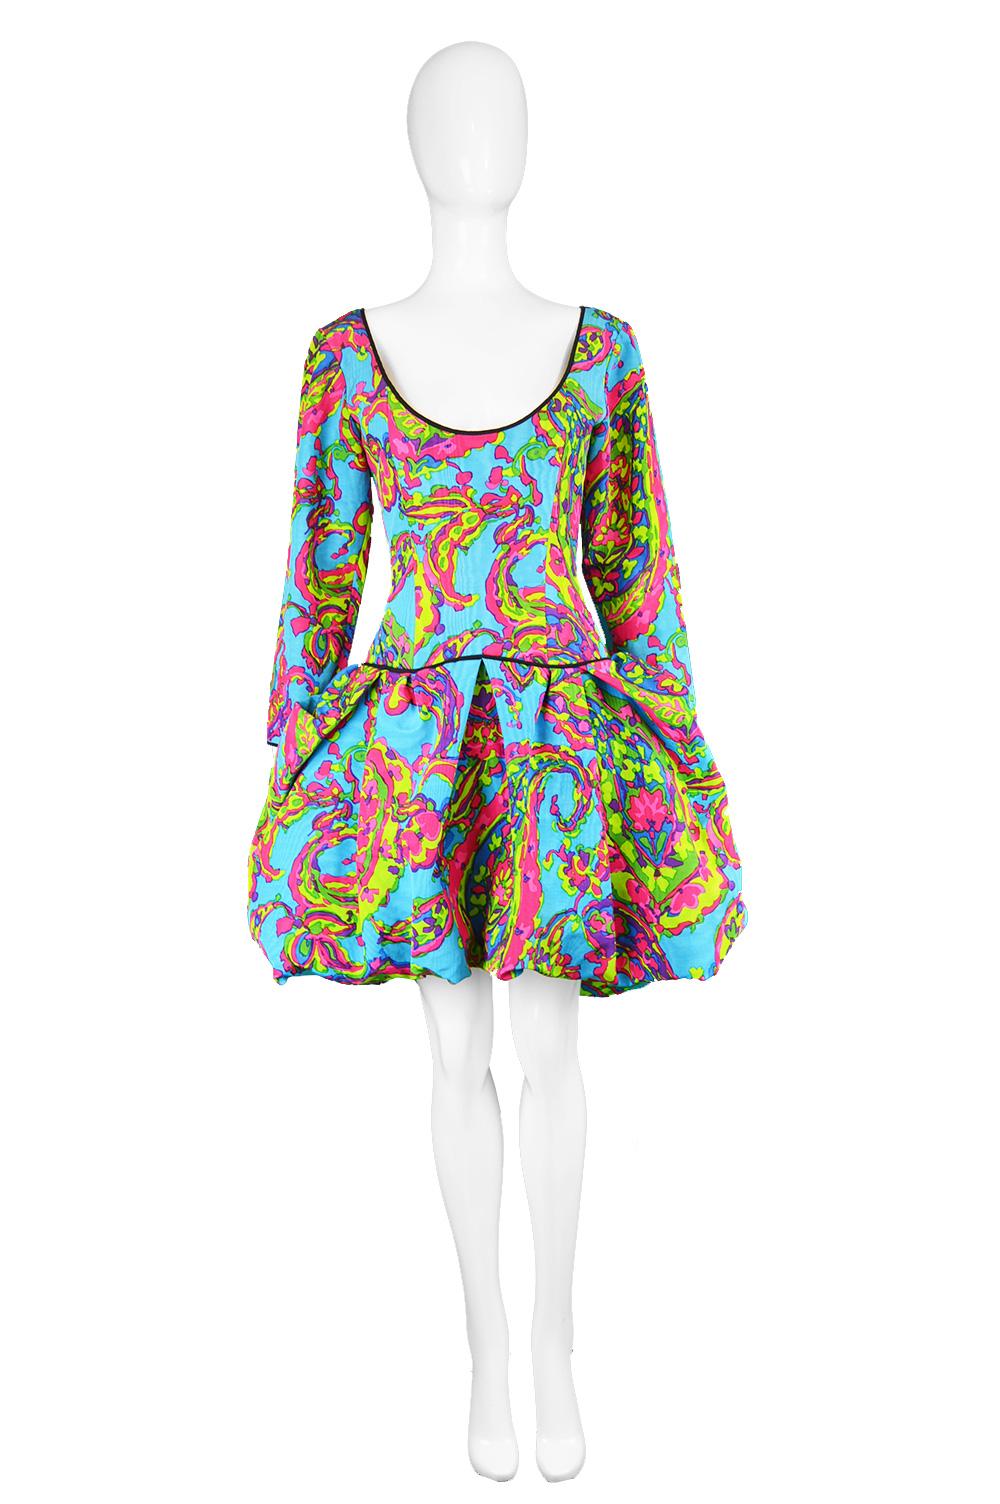 A showstopping vintage dress from the late 80s by legendary French fashion designer, Yves Saint Laurent. In a boldly multicolored, watered silk taffeta / moiré fabric with a paisley inspired pattern throughout in hues of blue, pink, purple and